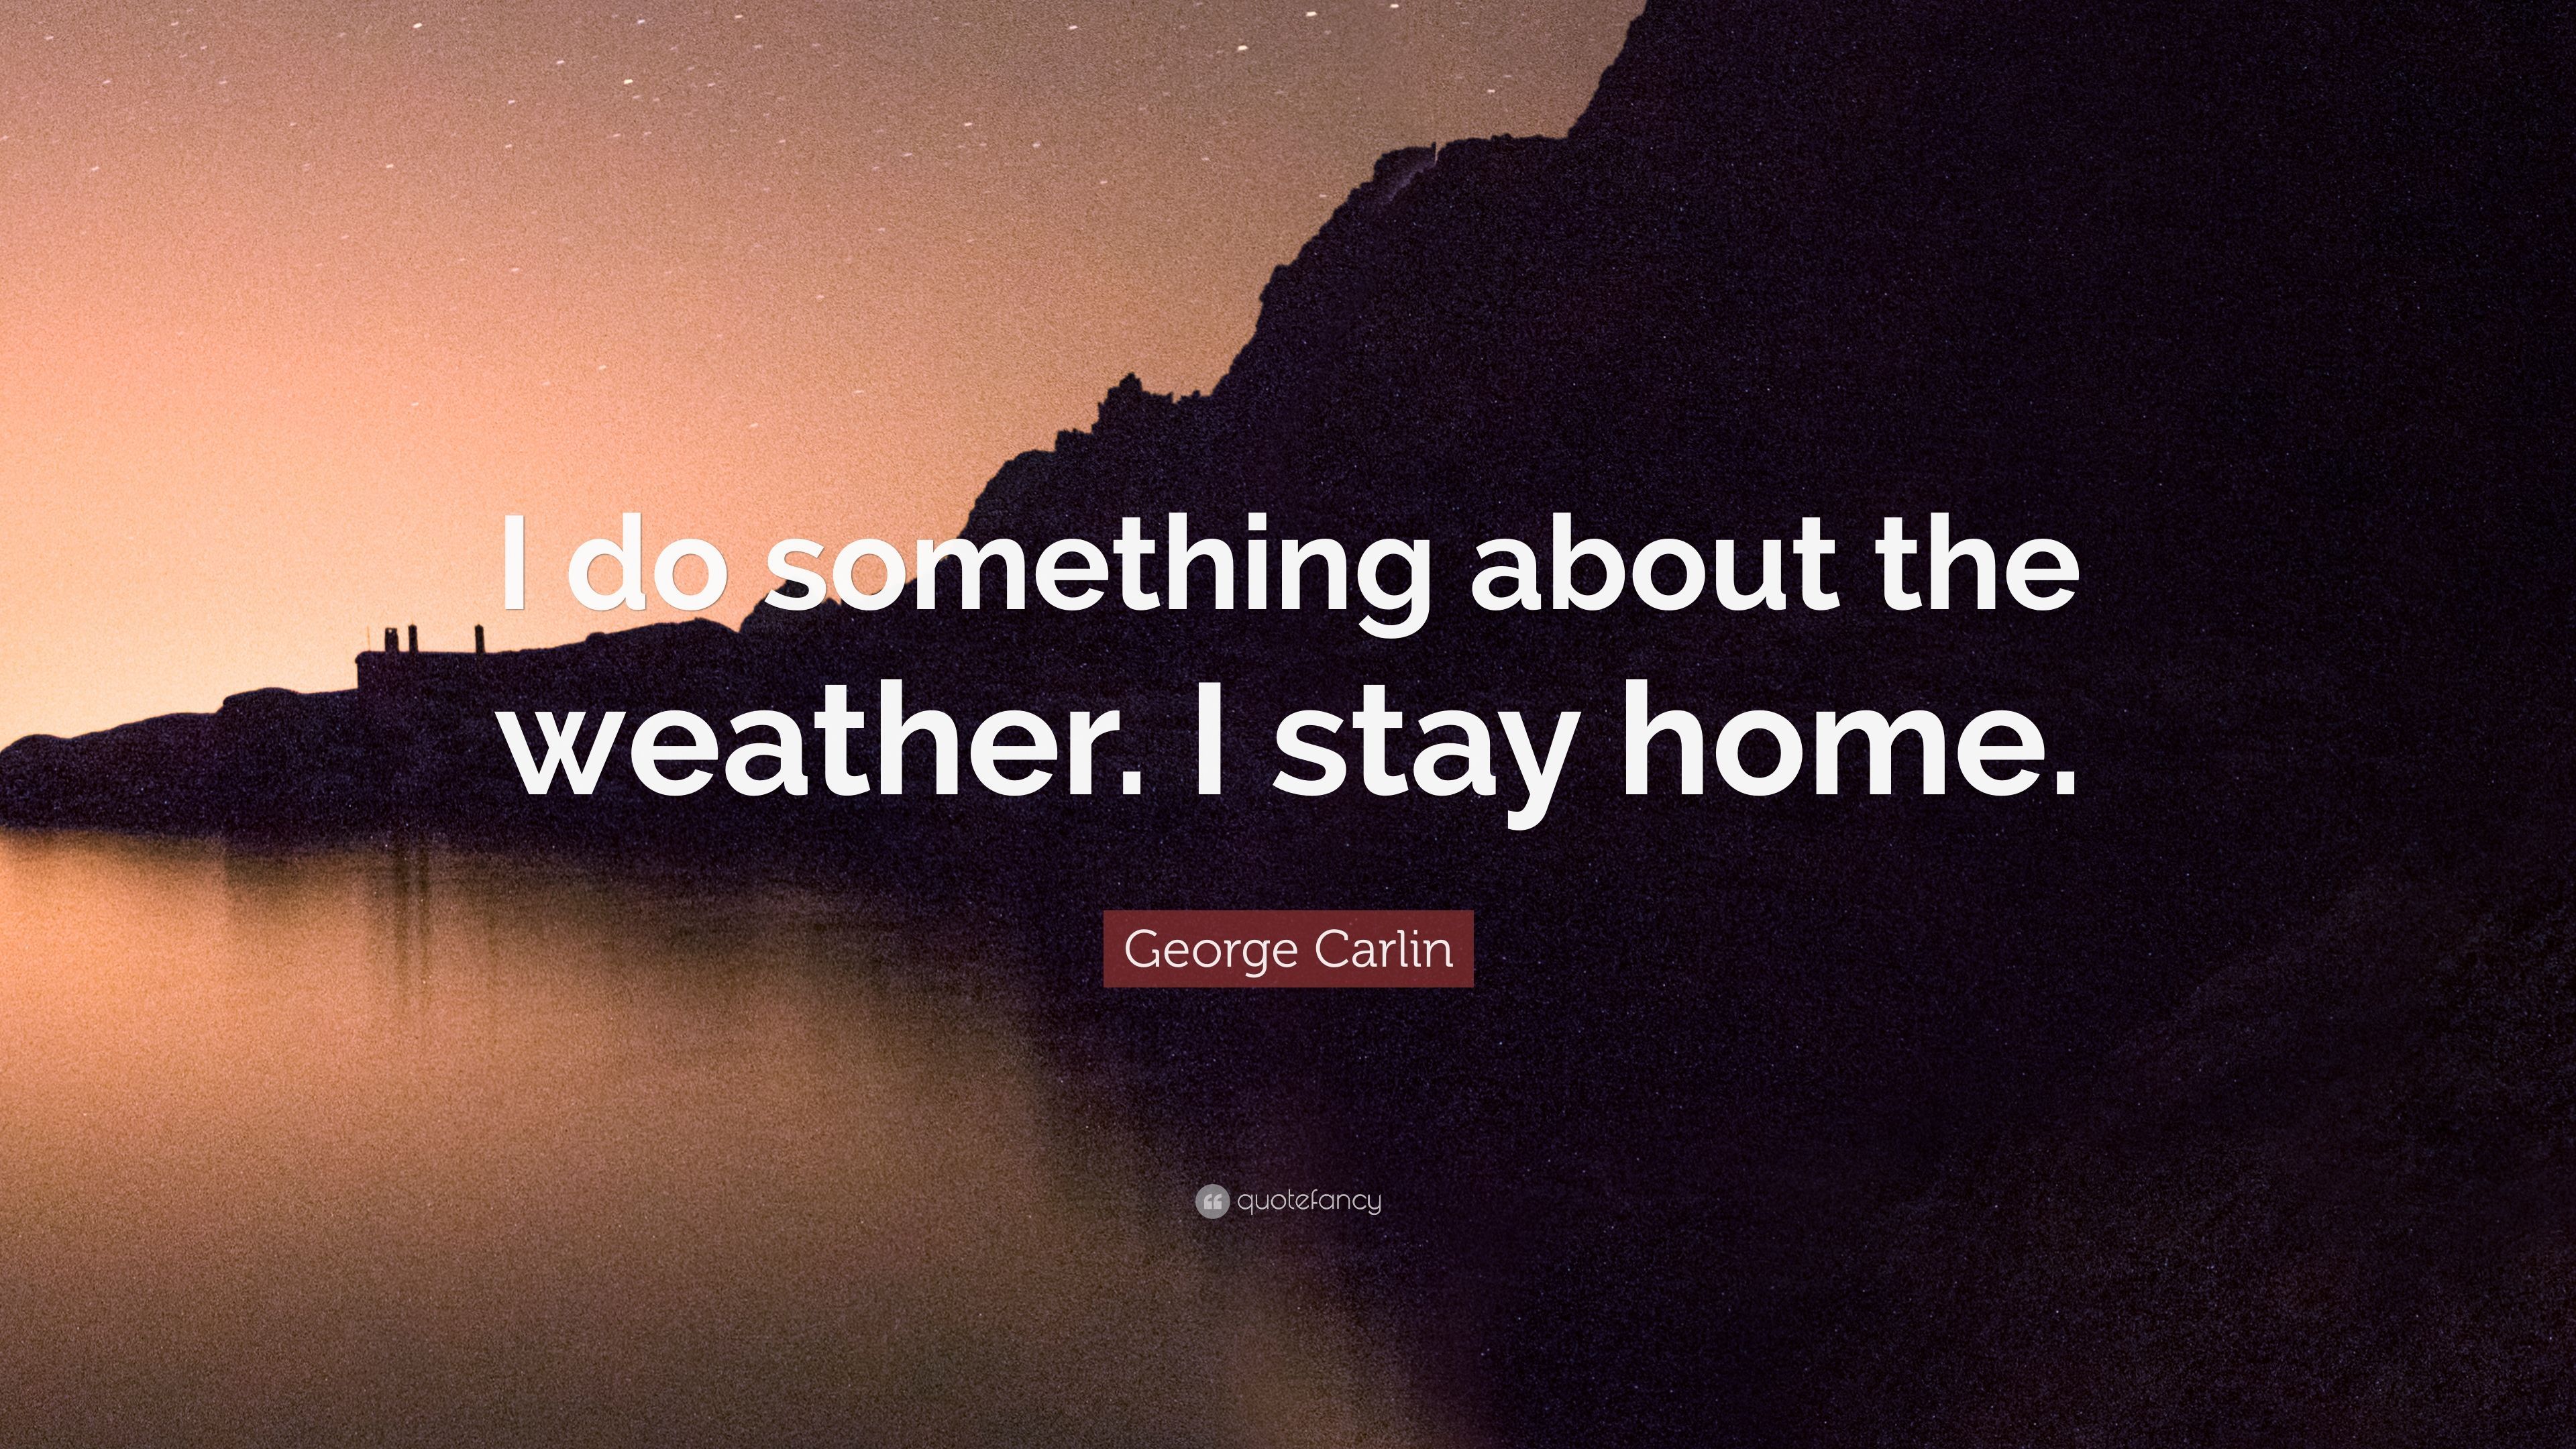 George Carlin Quote: “I do something about the weather. I stay